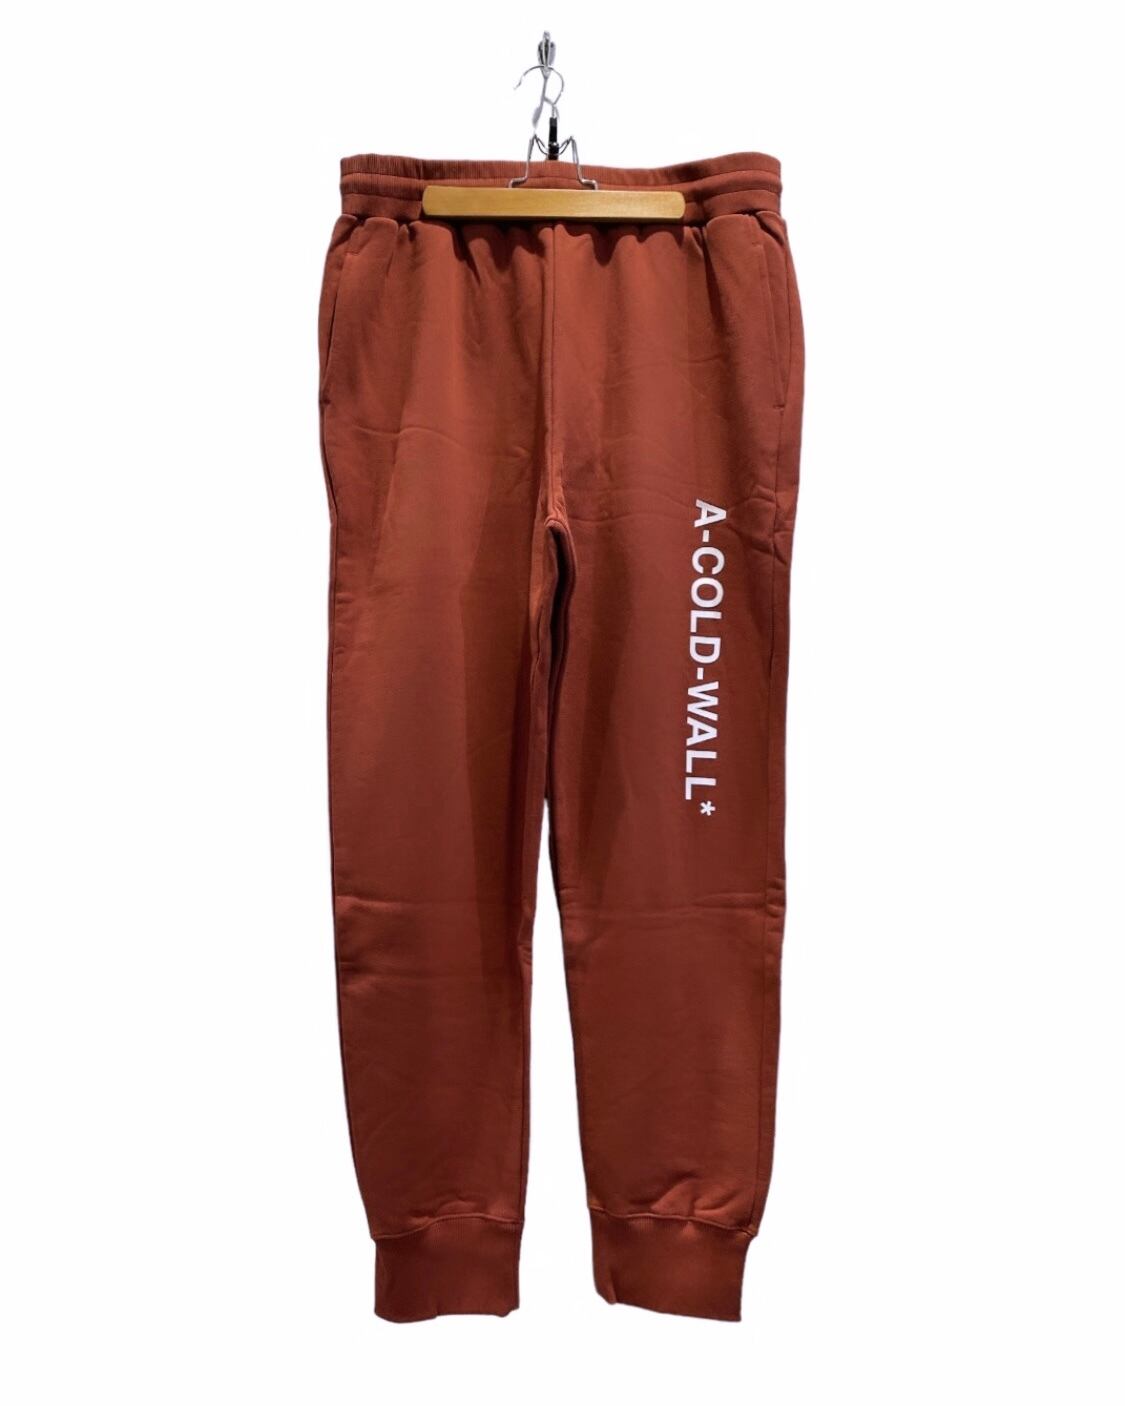 A-COLD-WALL* / ESSENTIAL LOGO SWEAT PANTS